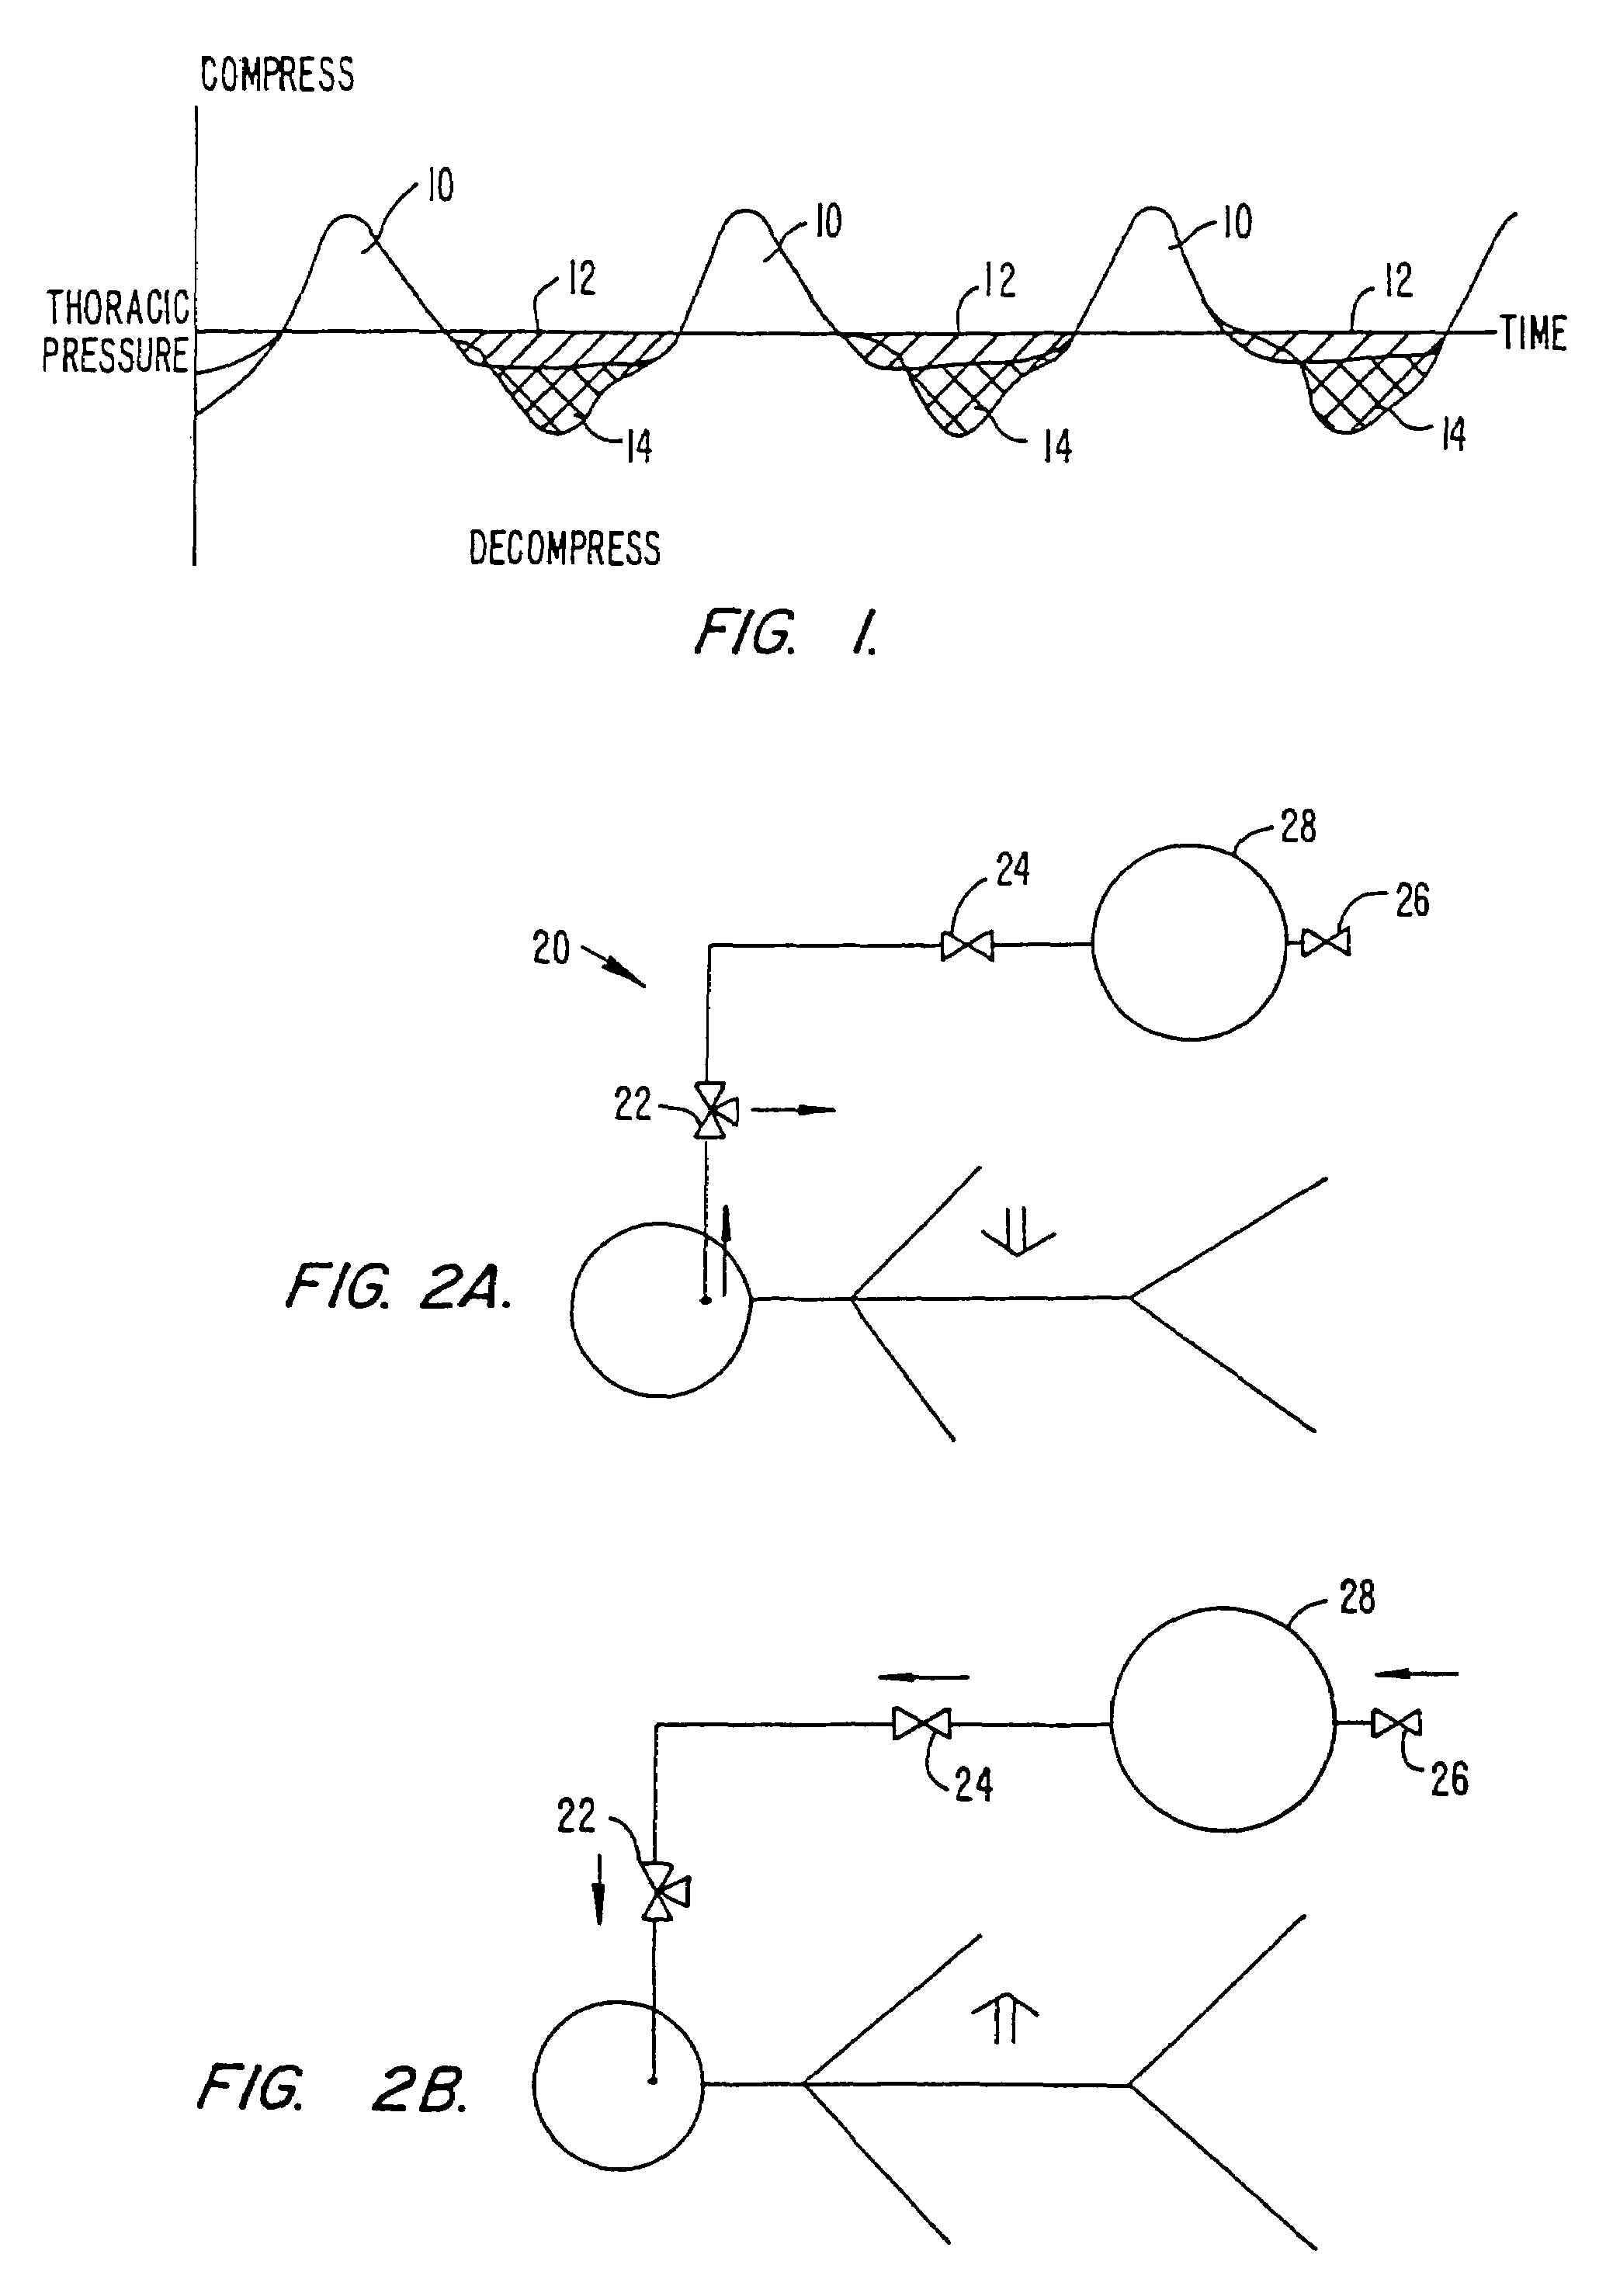 Diabetes treatment systems and methods